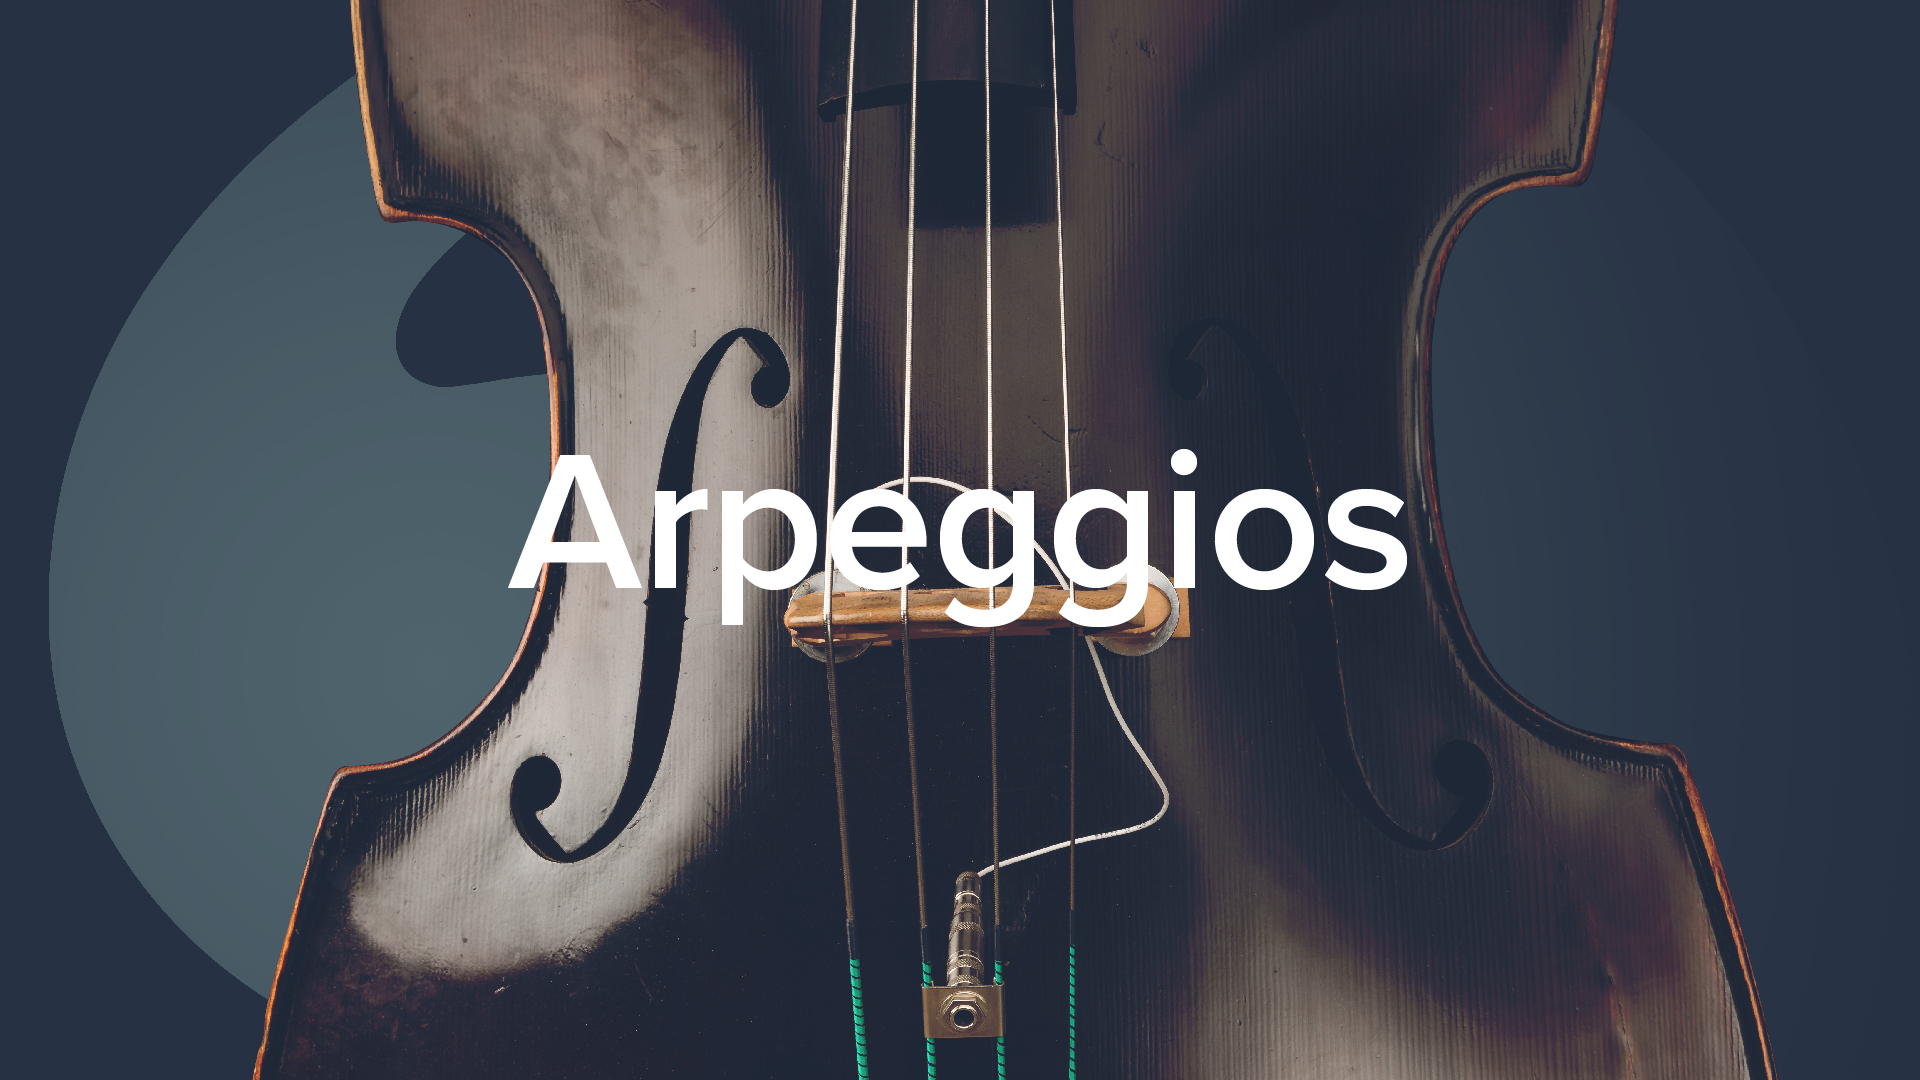 Double Bass Arpeggios: The Play-Along Collection by Geoff Chalmers